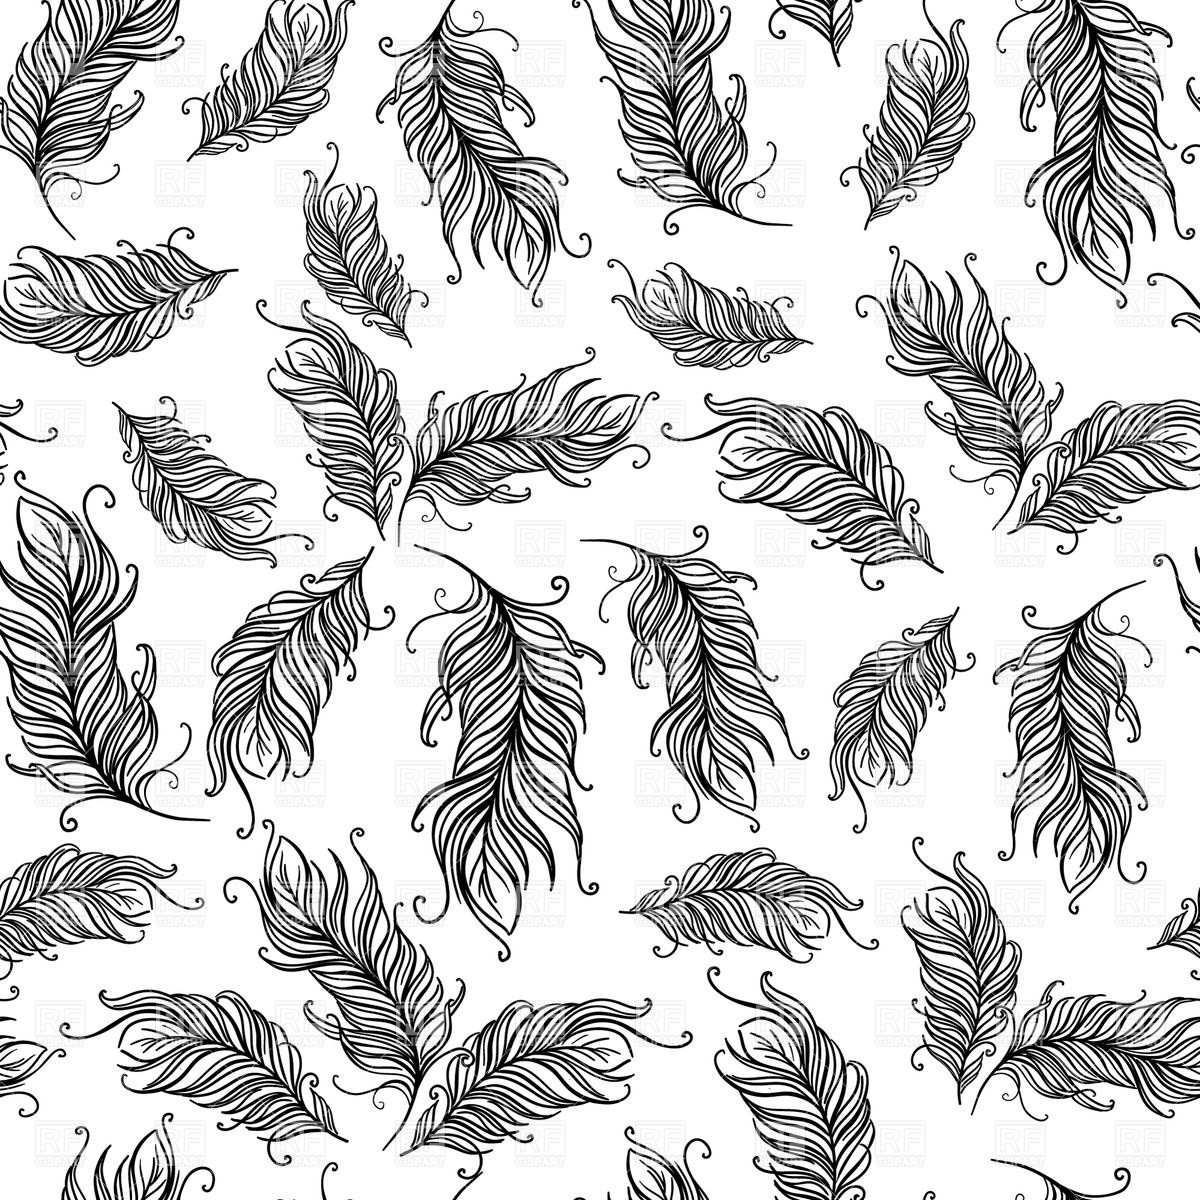 Download Feather Pattern Vector at Vectorified.com | Collection of ...